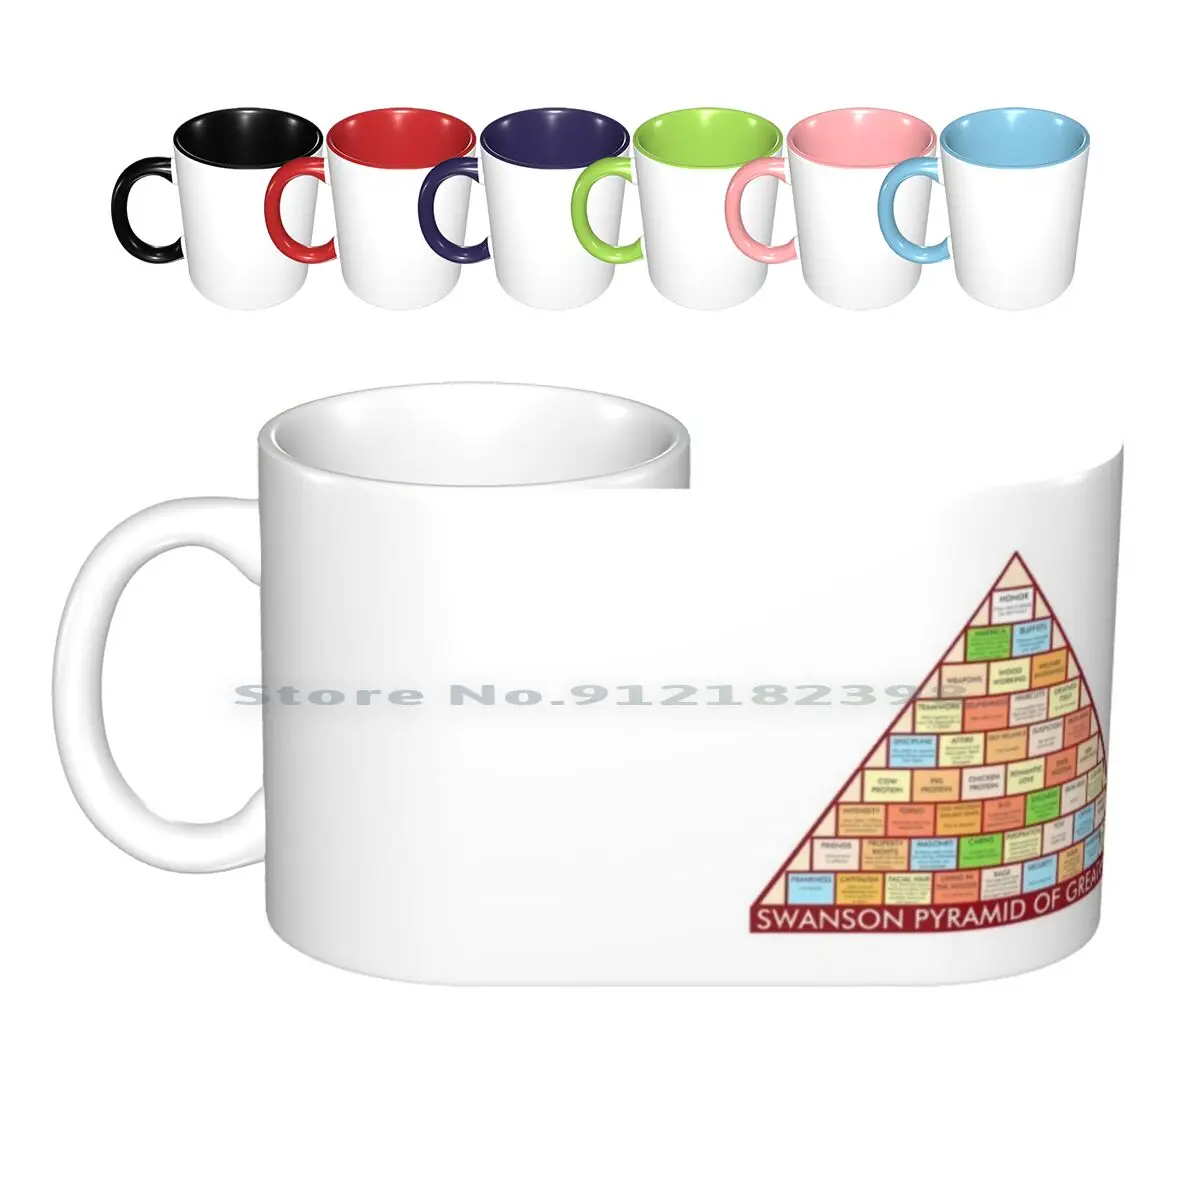 

Ron Swanson Pyramid Of Greatness Ceramic Mugs Coffee Cups Milk Tea Mug Swanson Pyramid Of Greatness Ron Swanson Parks And Rec